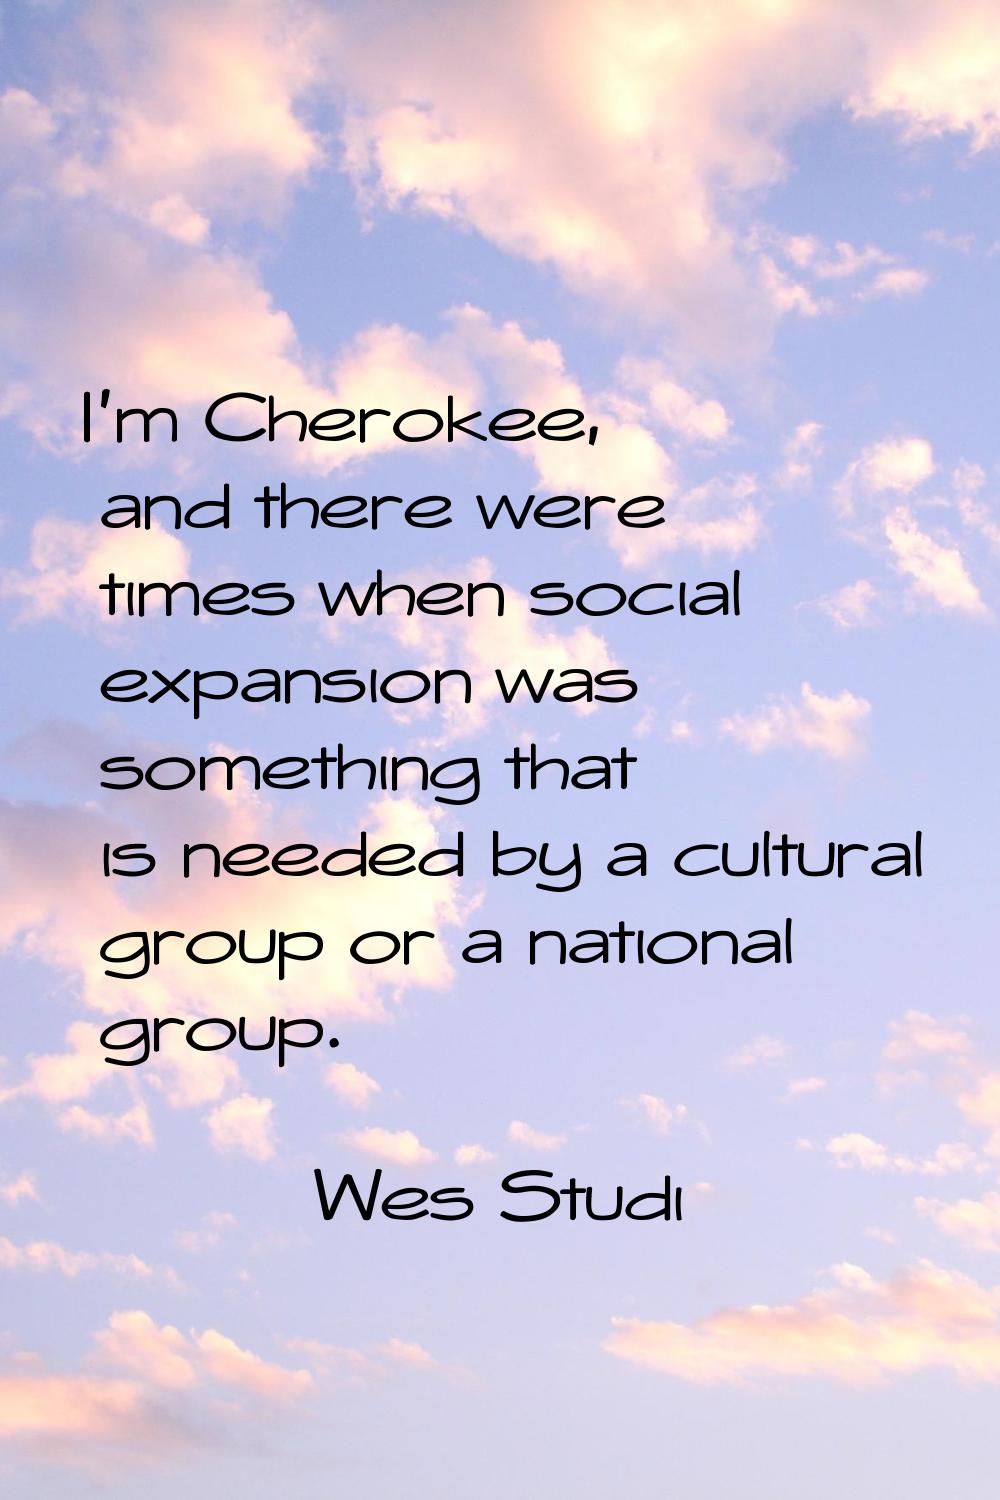 I'm Cherokee, and there were times when social expansion was something that is needed by a cultural